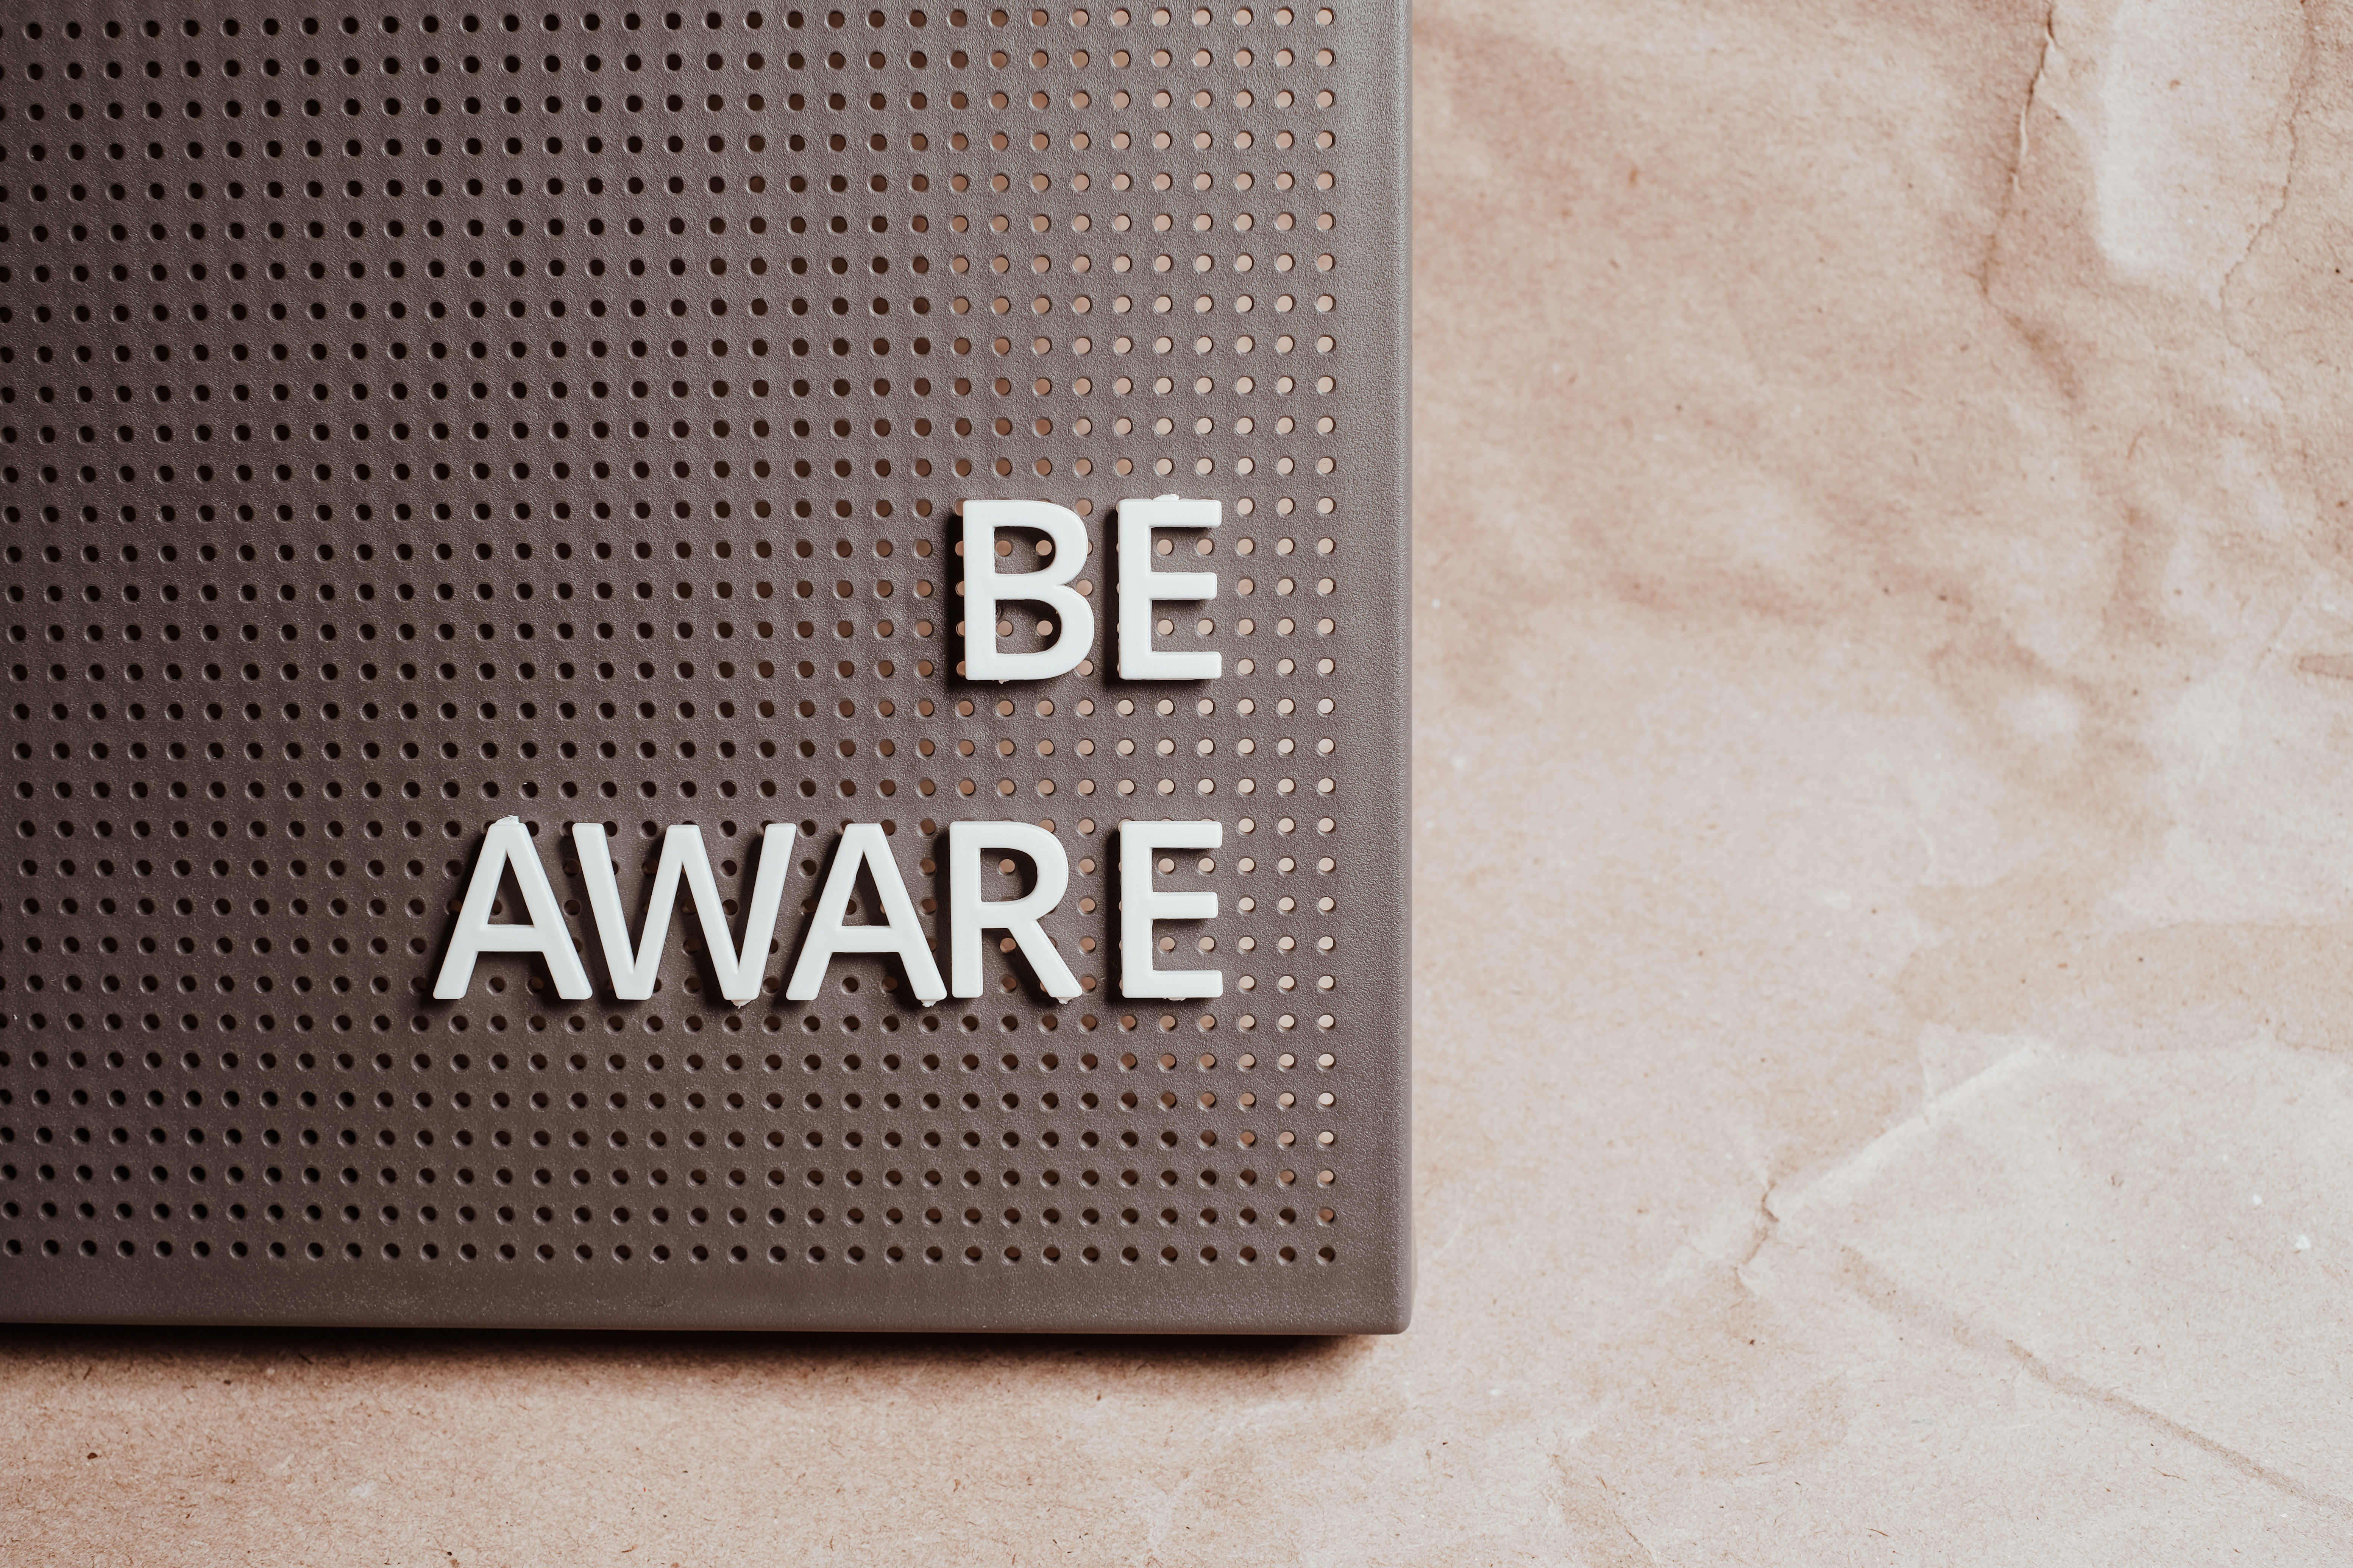 Sign that reads "Be Aware"